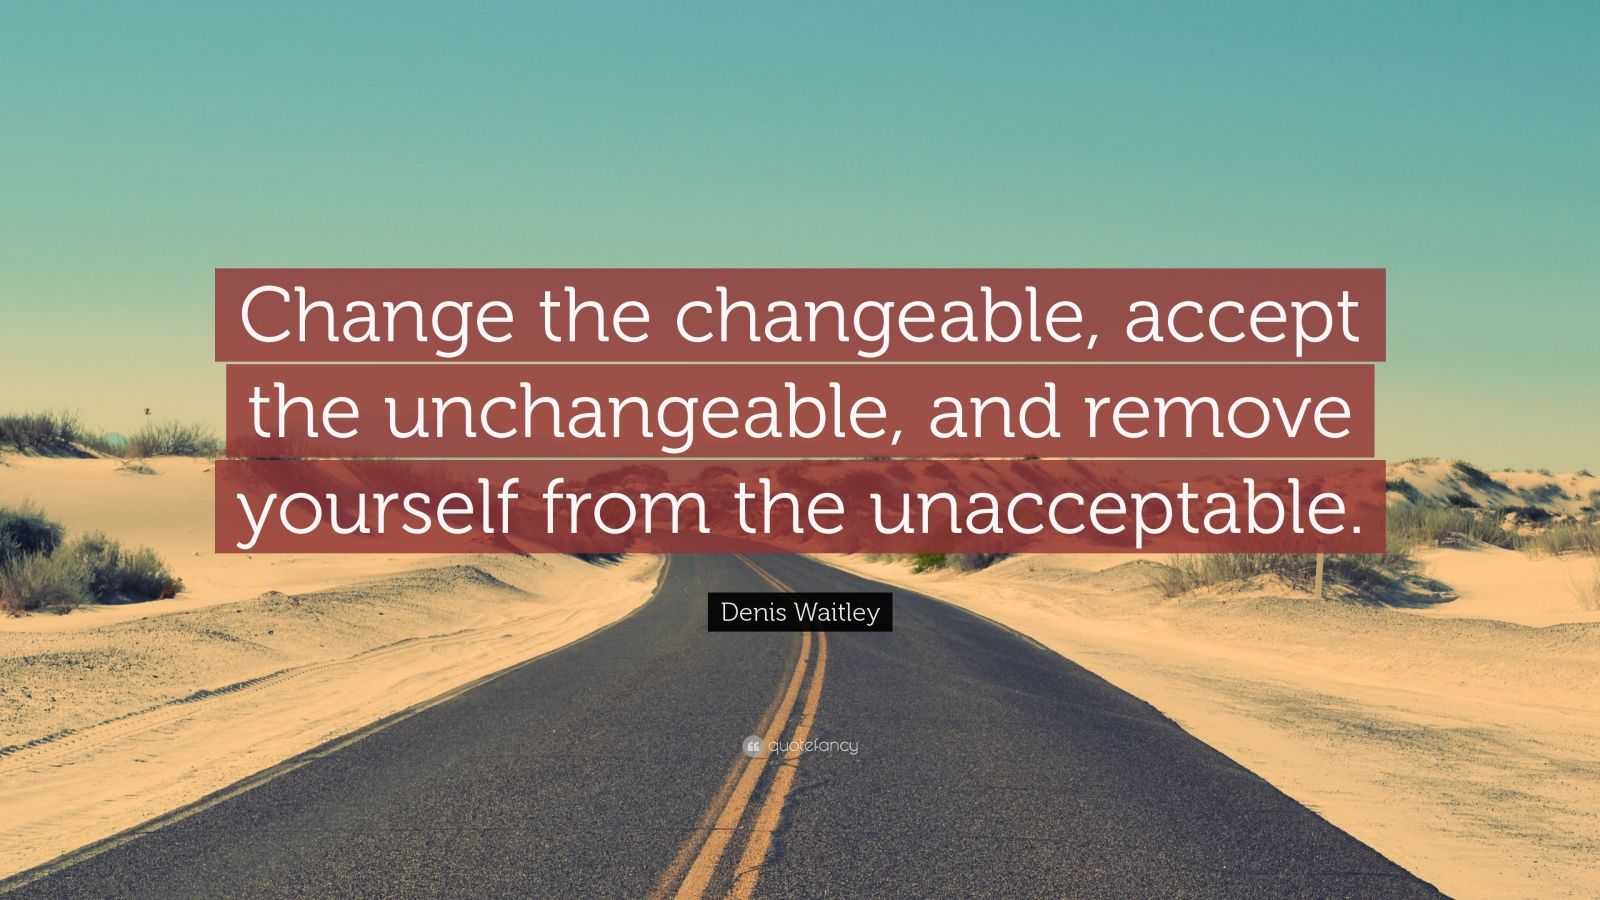 Denis Waitley Quote: “Change the changeable, accept the unchangeable ...